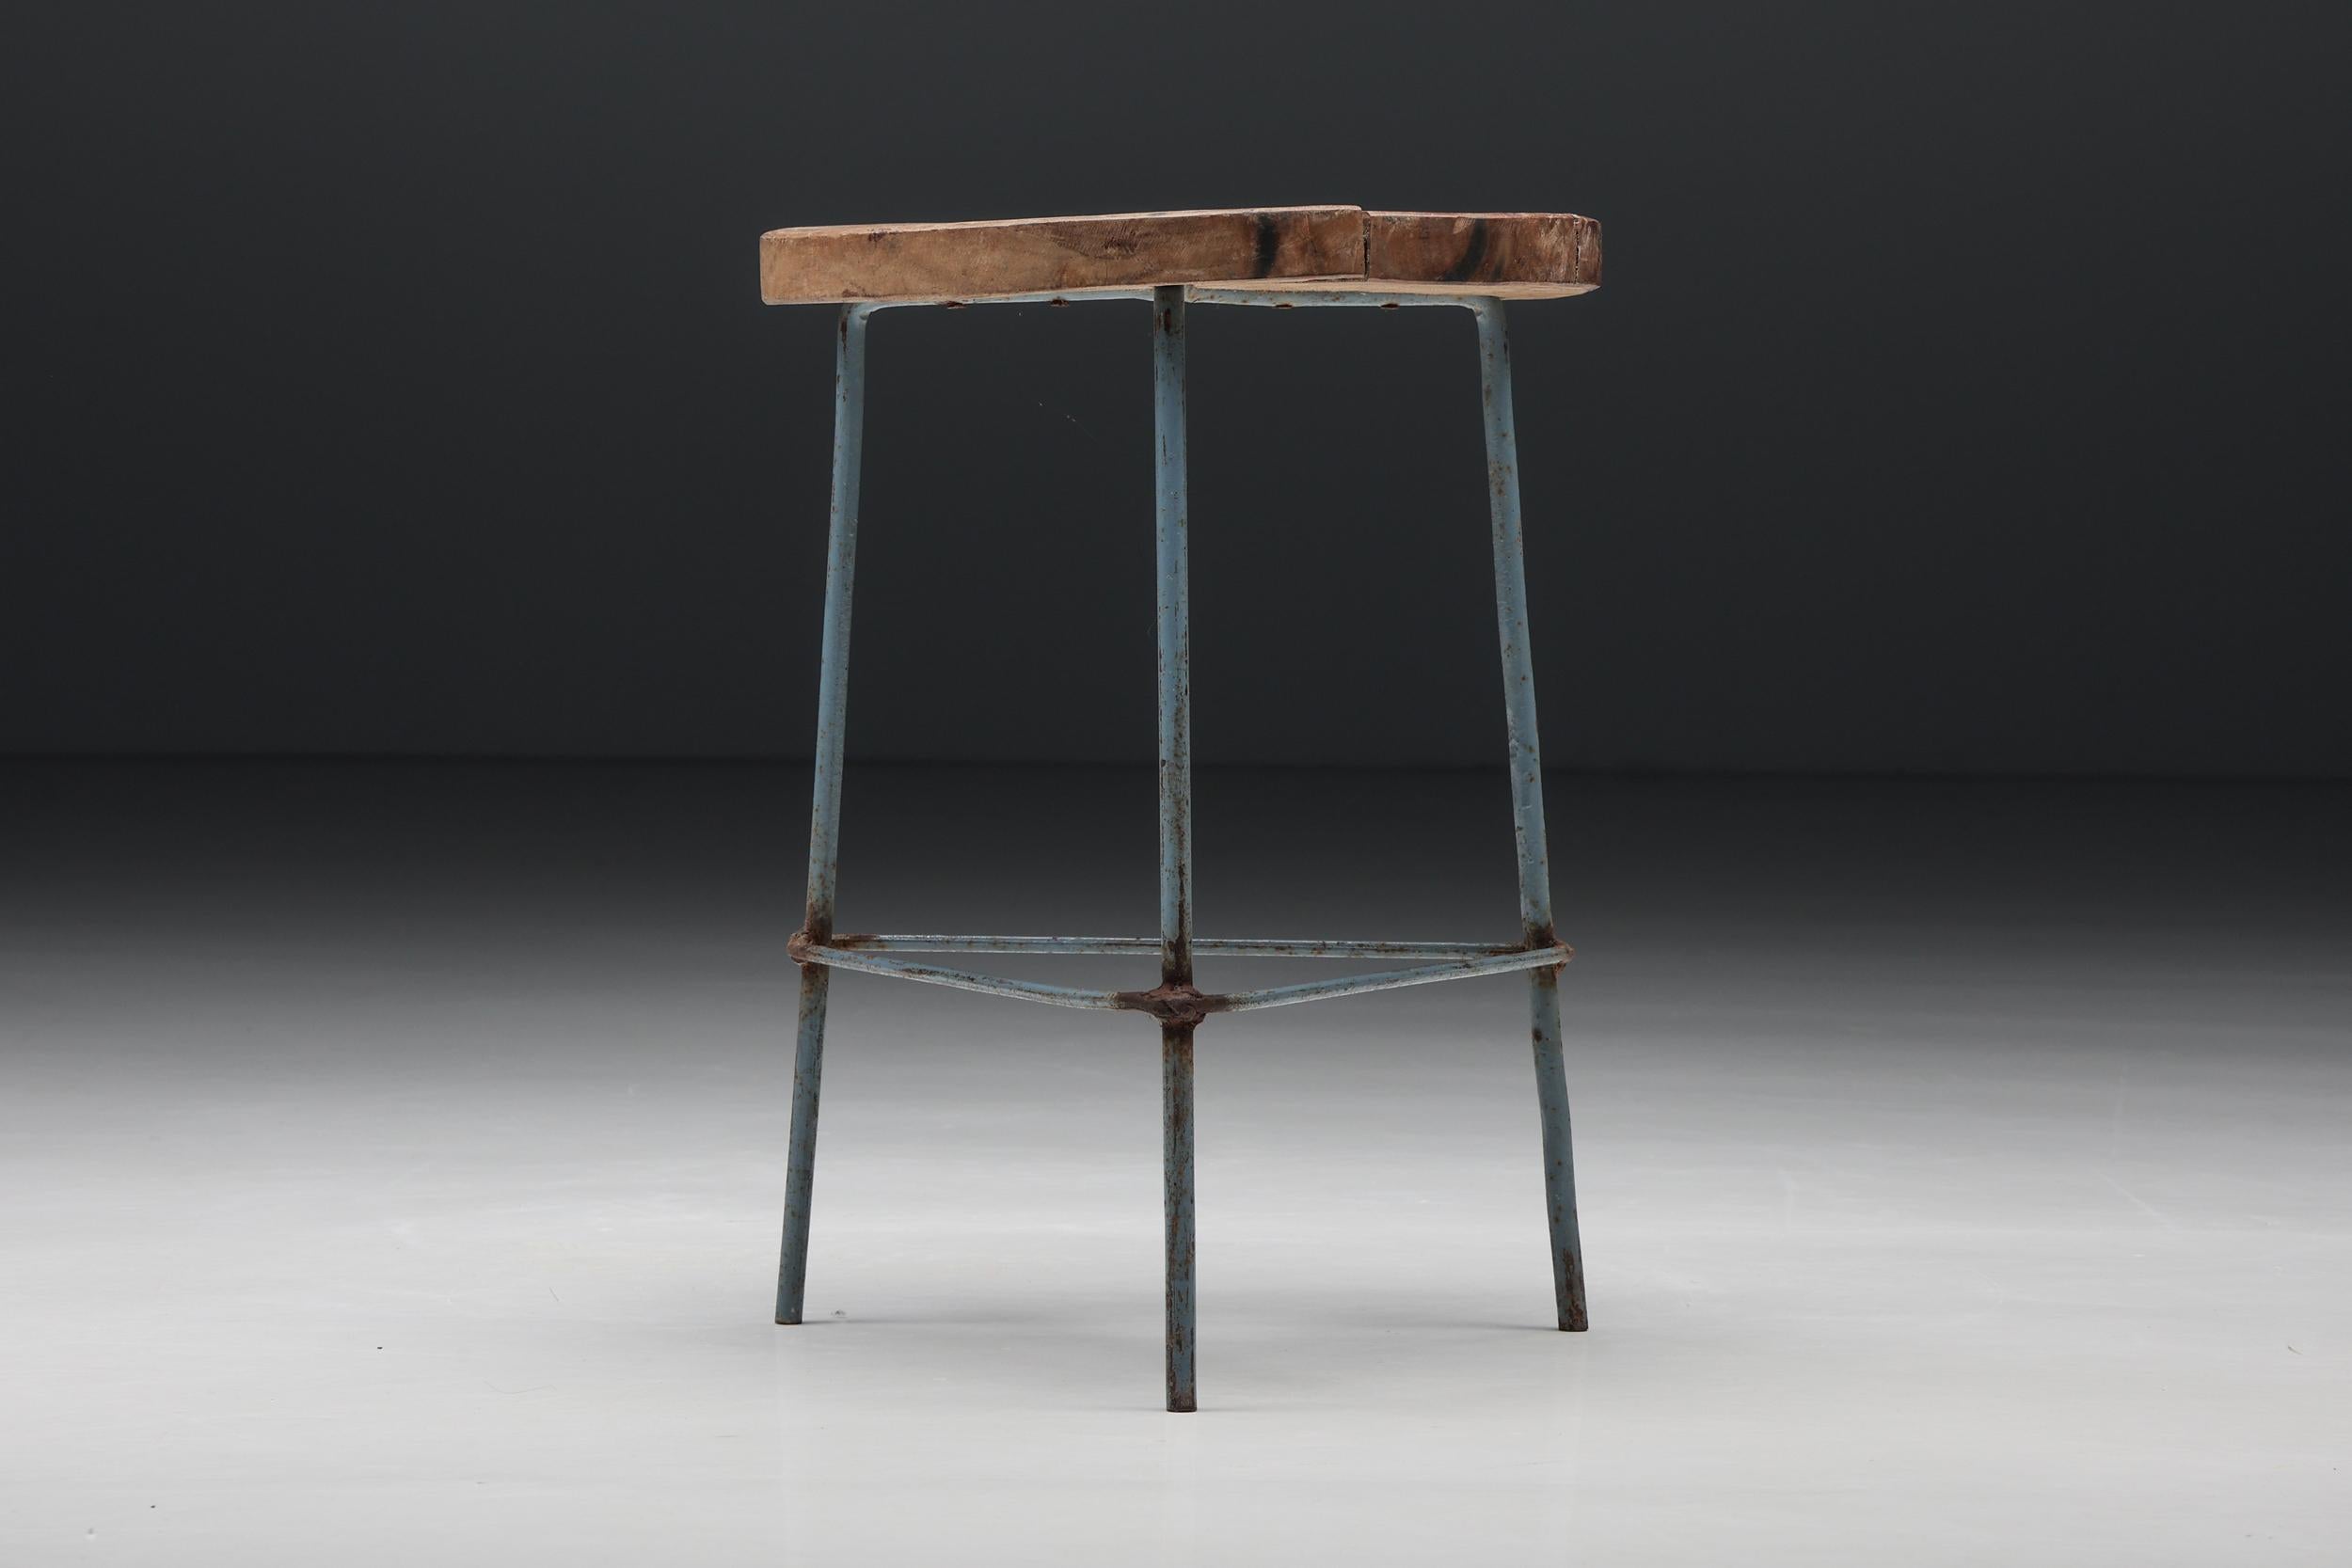 Indian Pierre Jeanneret Chandigarh Stools, Metal & Wood, India, Patina, 1960's